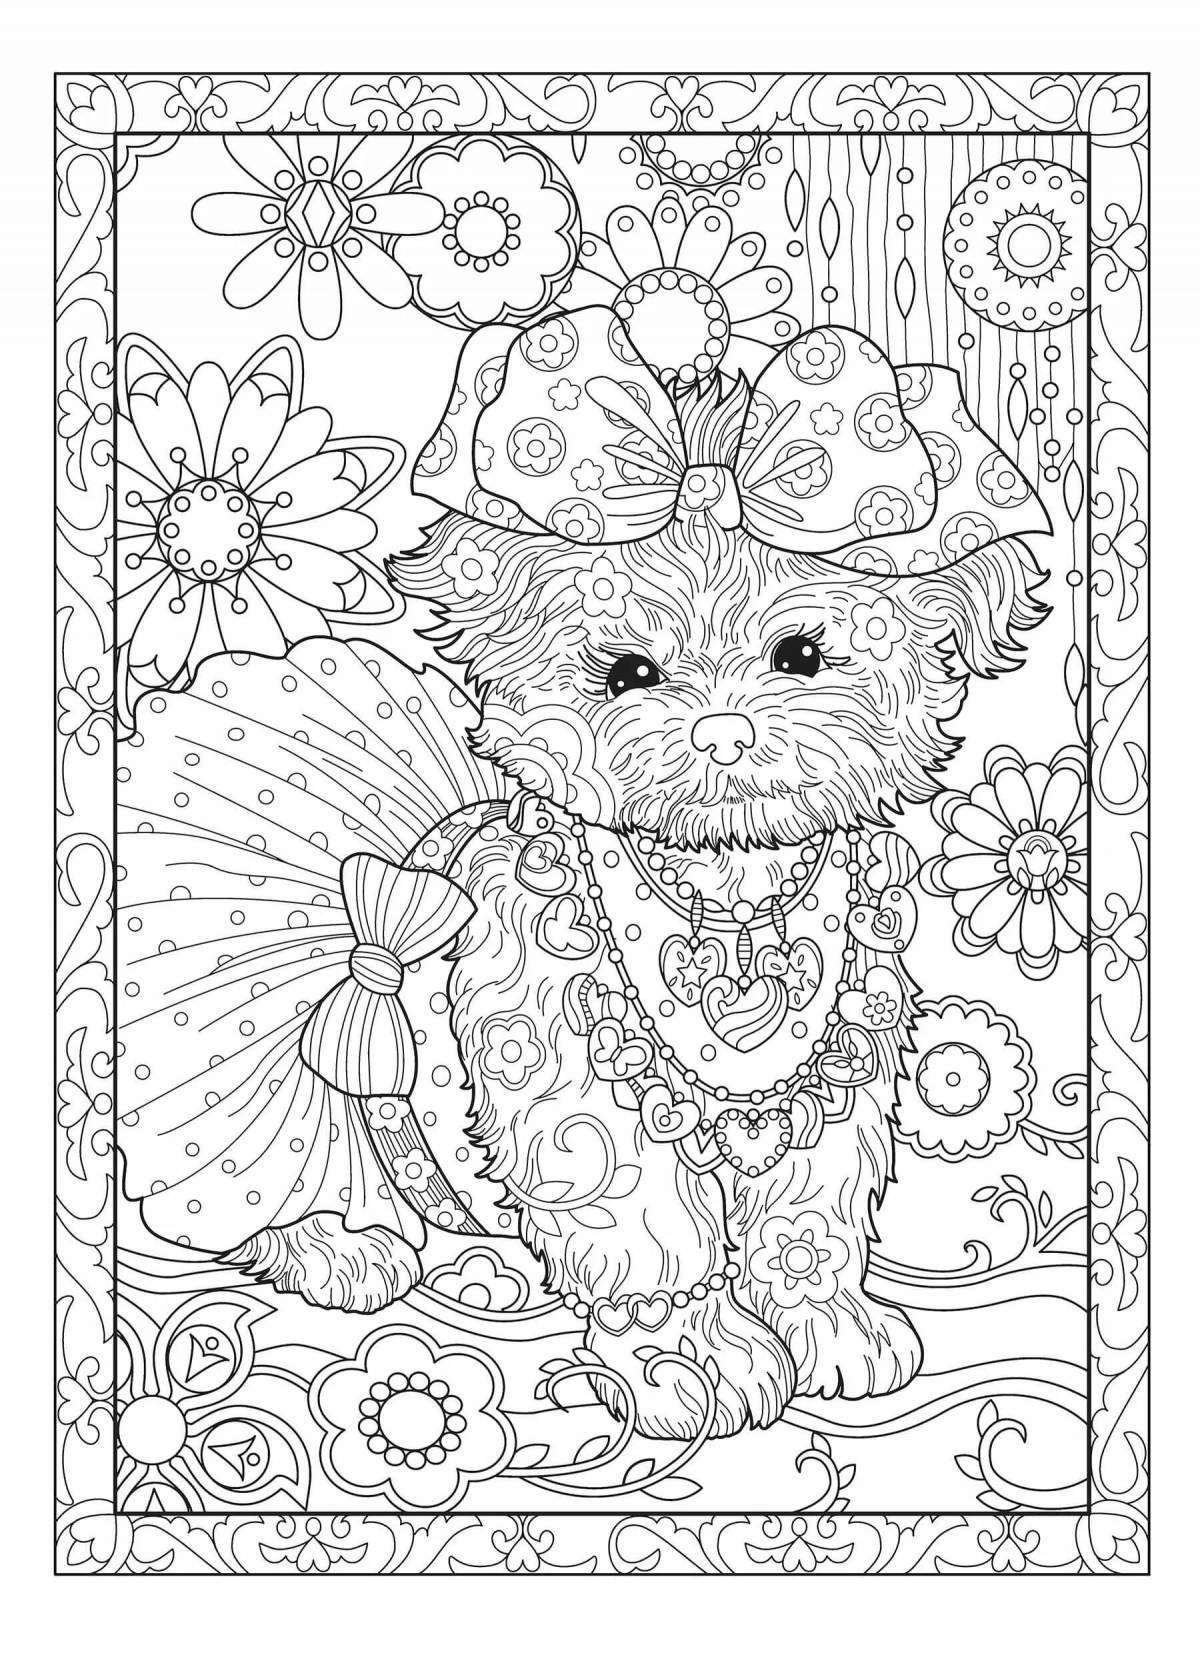 Adorable 10 year old animal coloring book